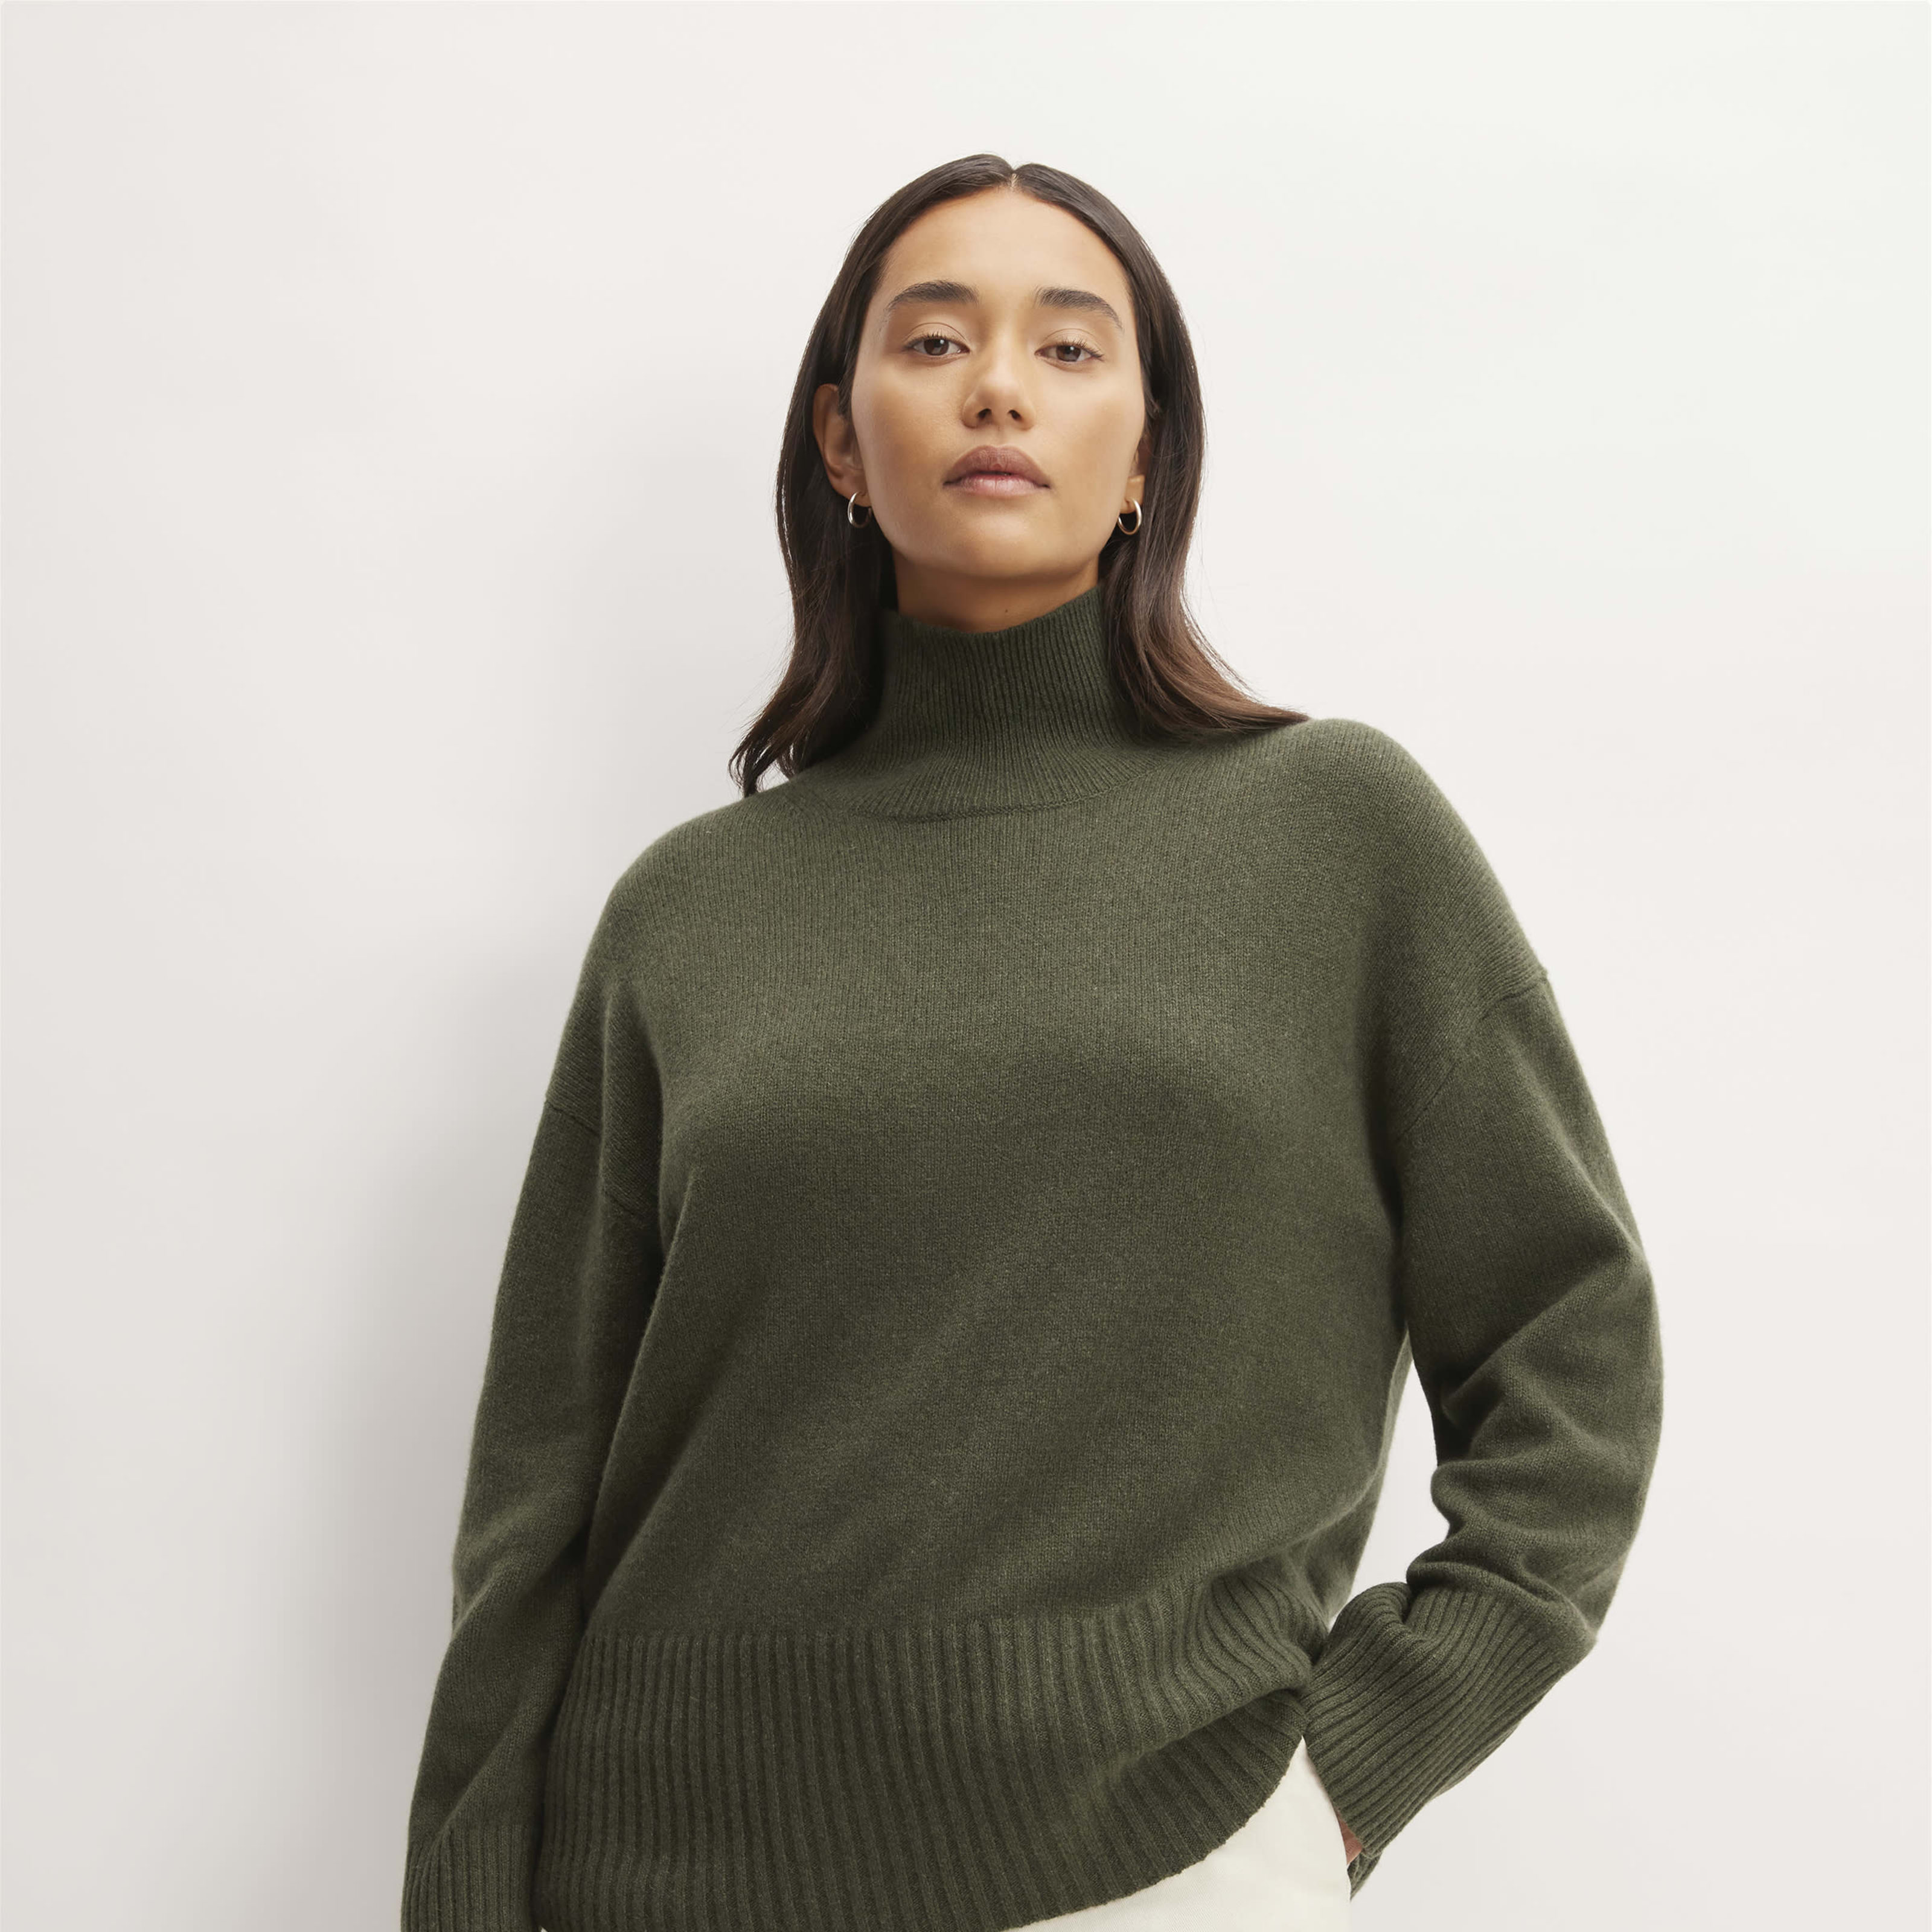 women's cashmere oversized turtleneck sweater by everlane in olive, size xxs